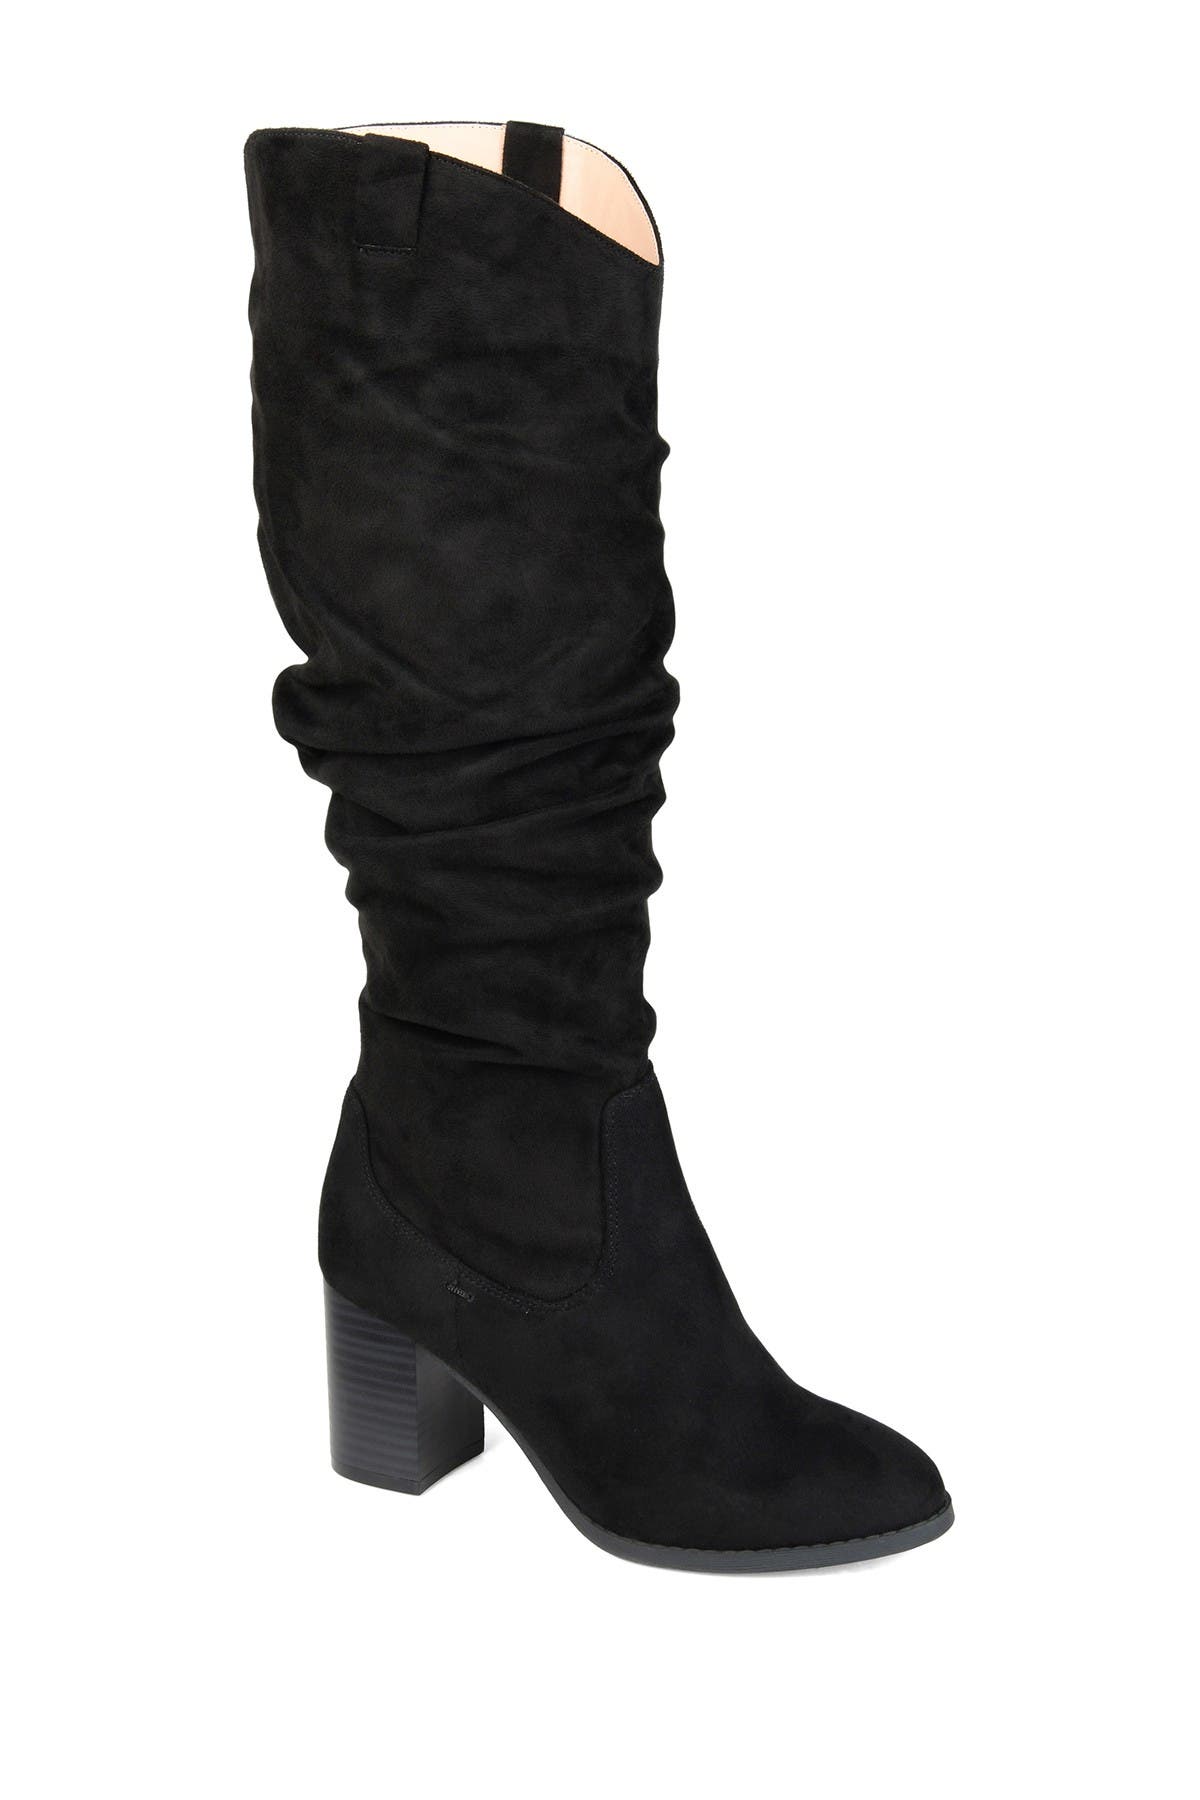 journee extra wide calf boots